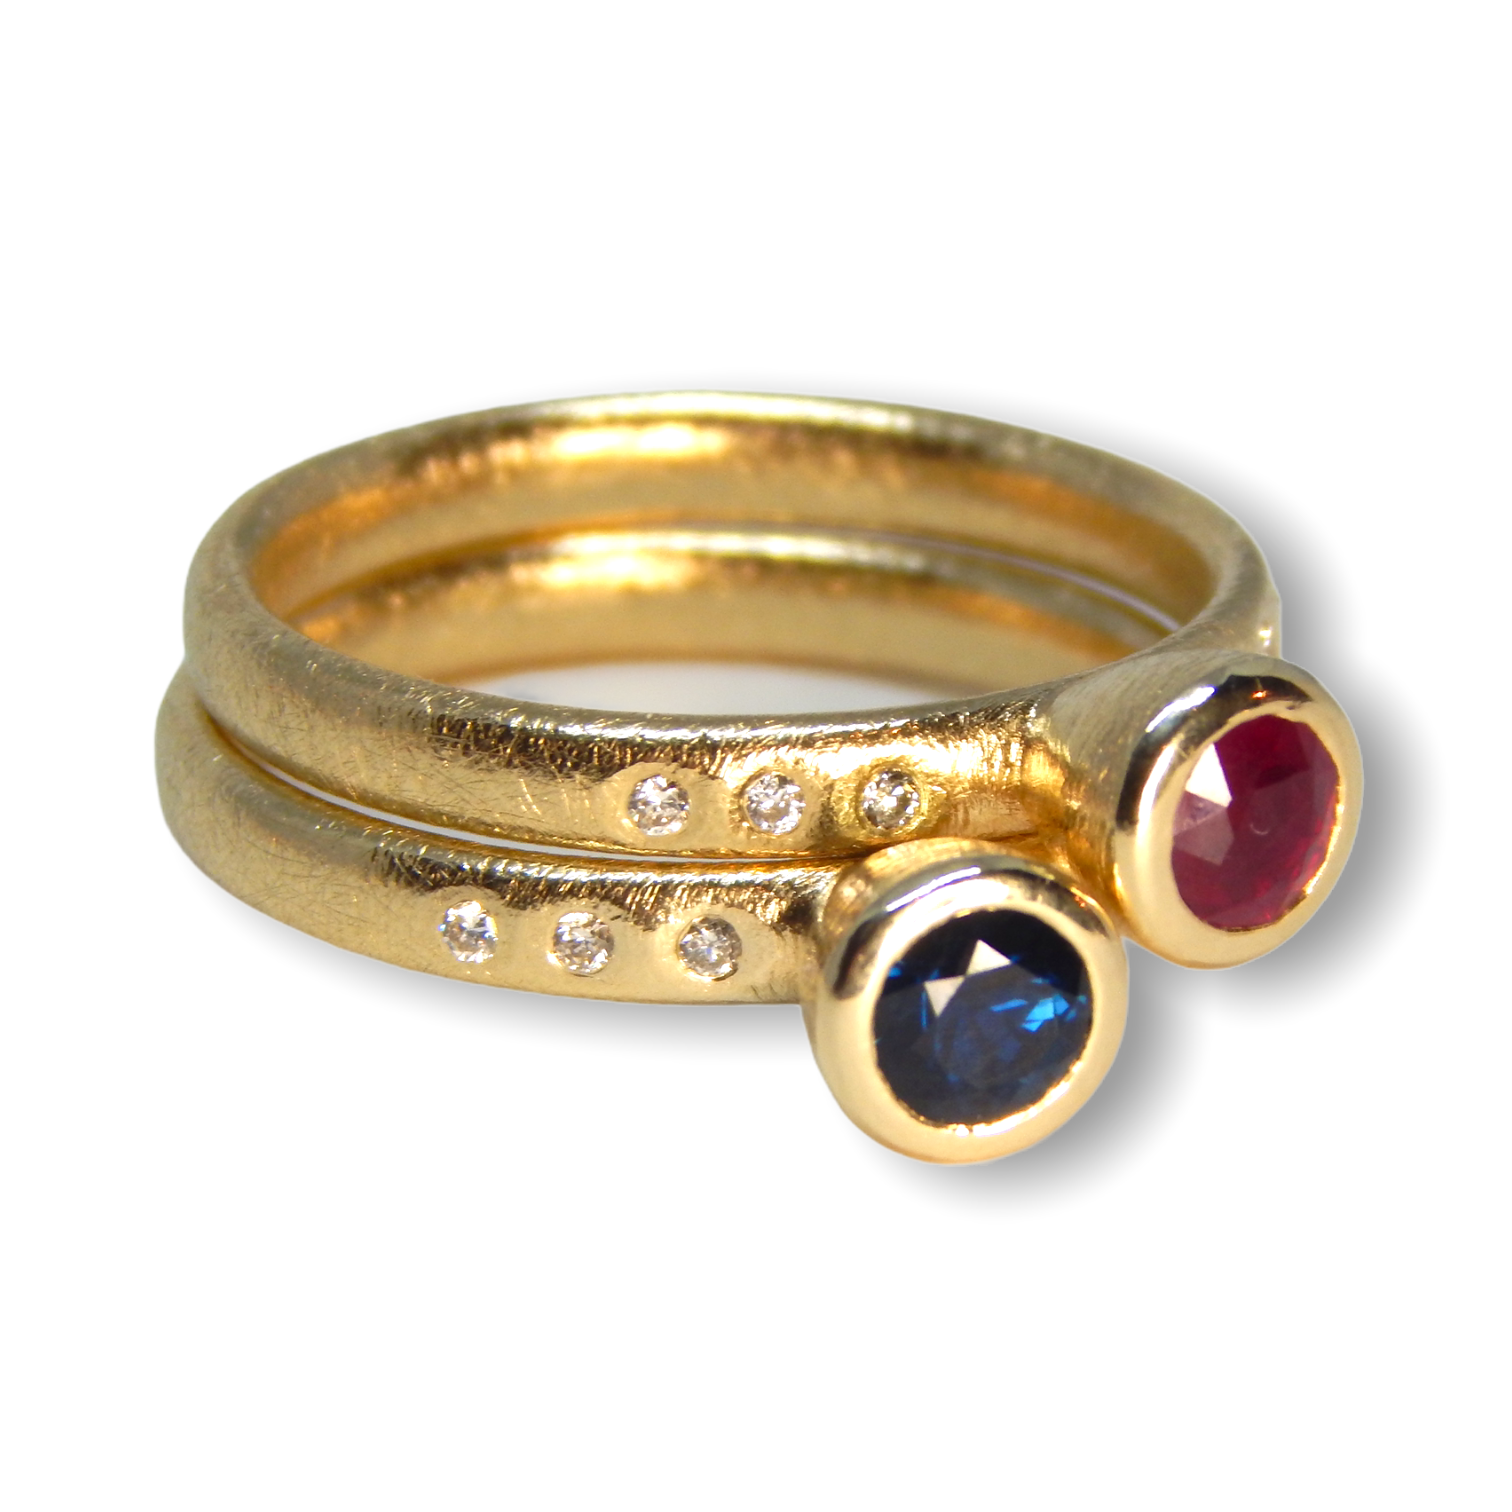 Charlotte's Custom Bespoke Tulip Stacker Ring Set  | In 9ct Yellow Gold | Set With A Blue Sapphire, Ruby And Diamonds